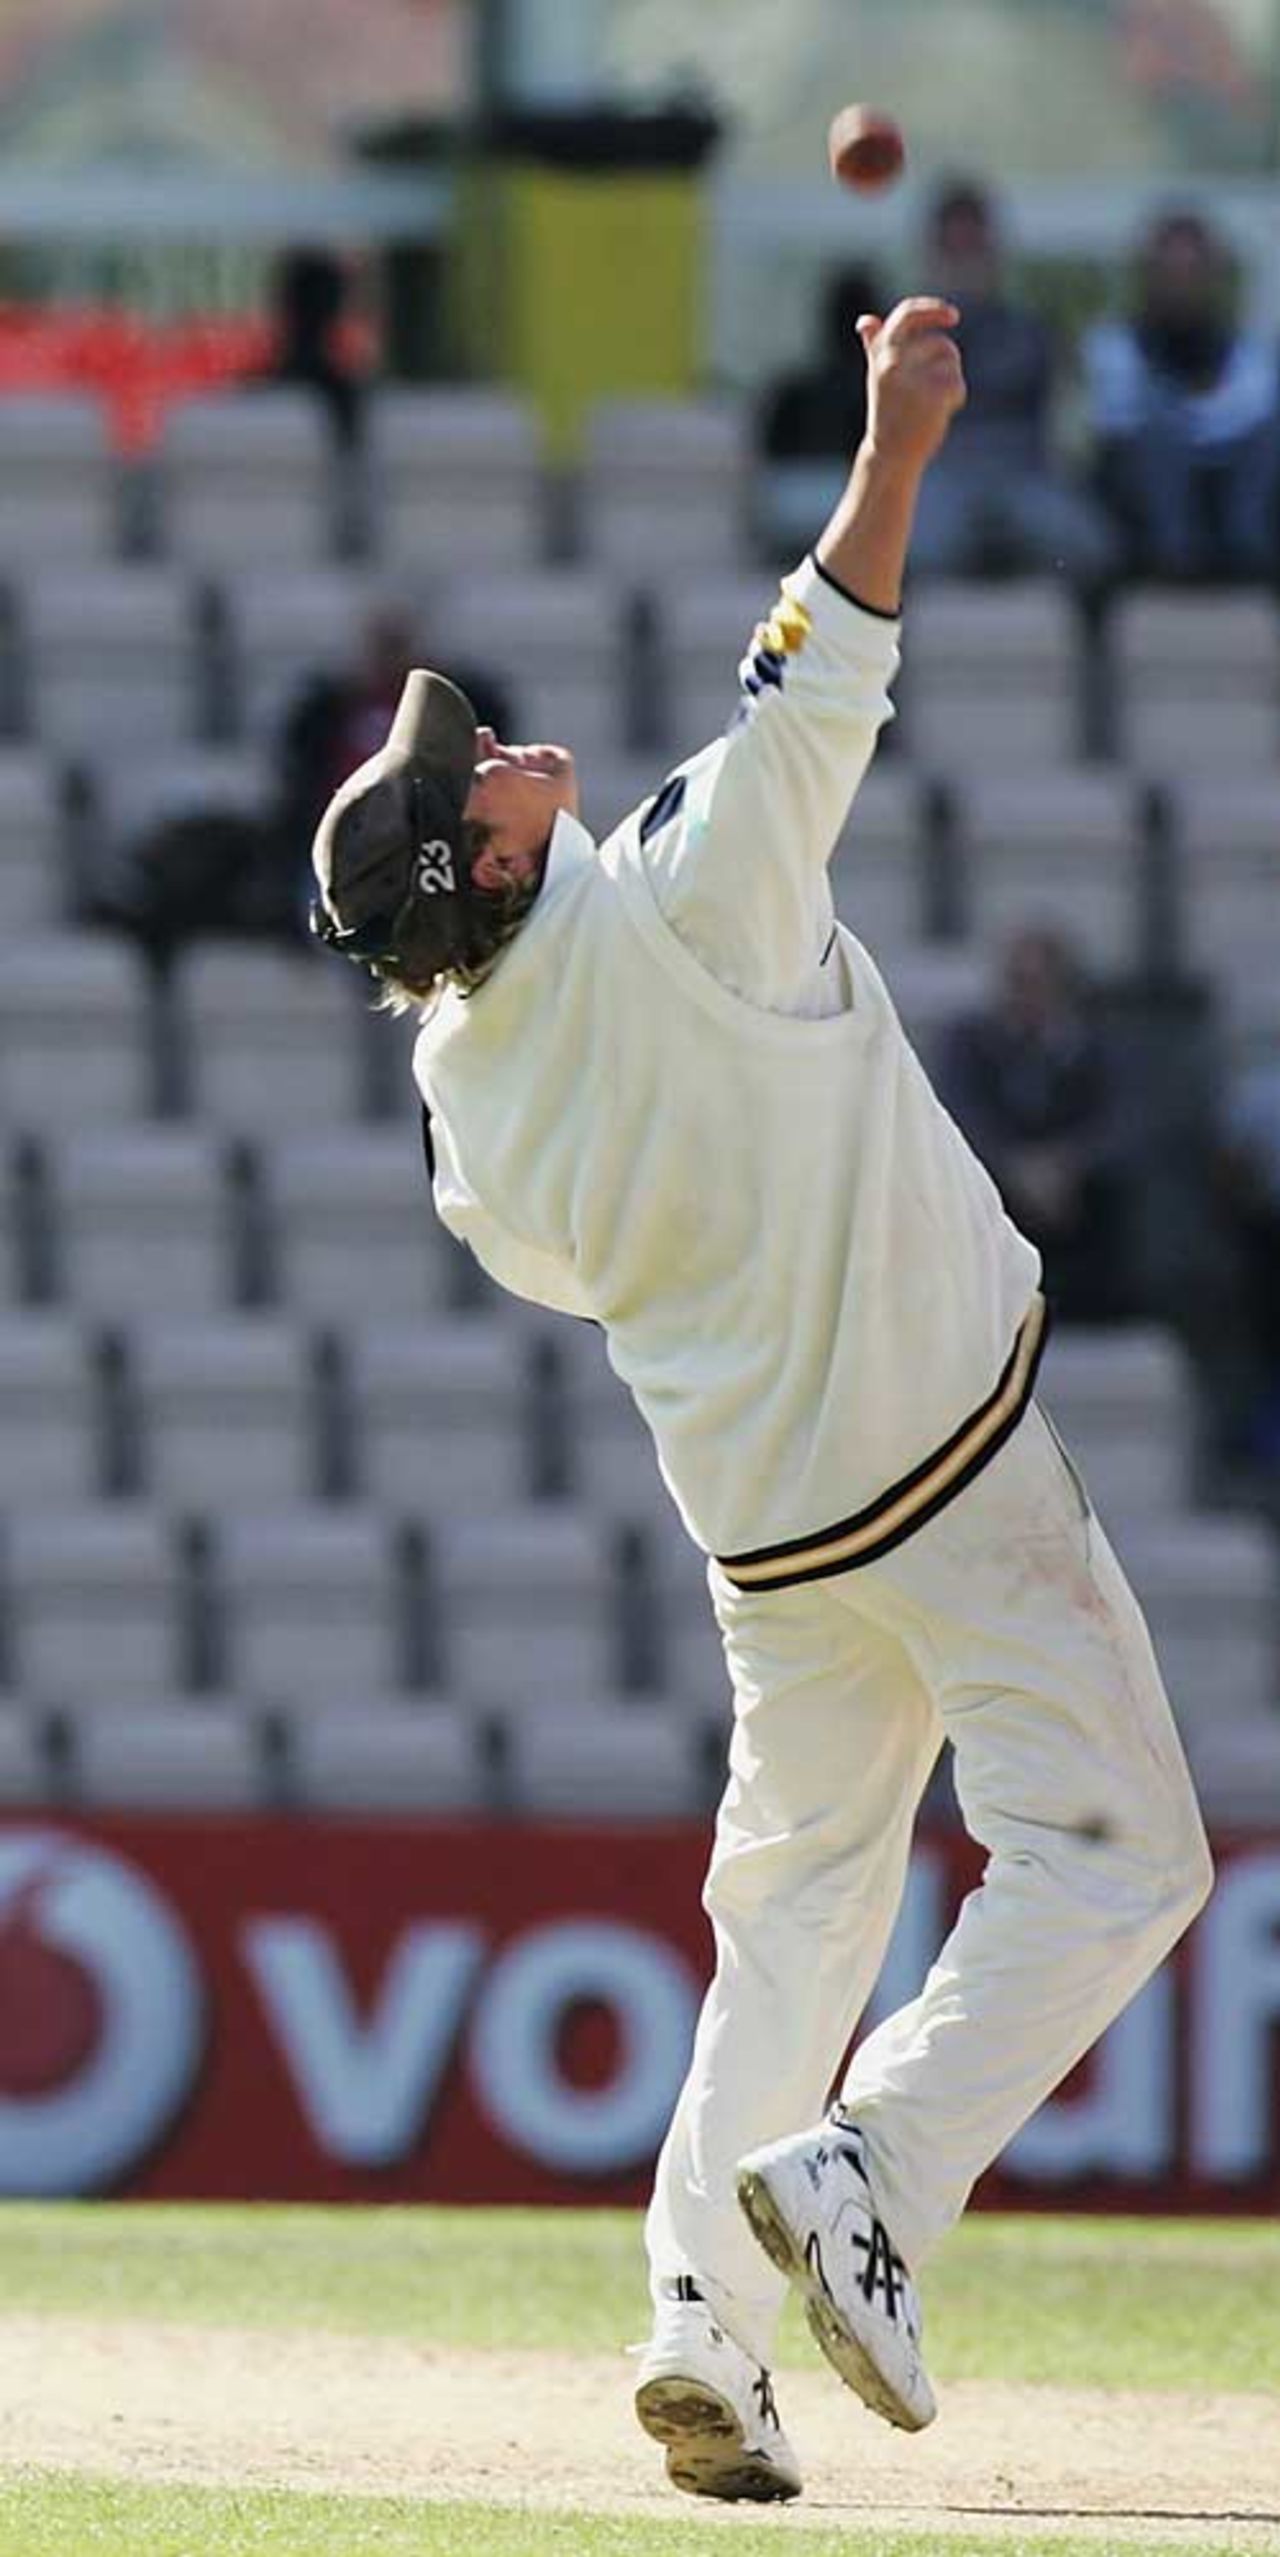 Shane Warne lobs a ball up while wearing his cap as Lancashire all of the final day, Hampshire v Lancashire, The Rose Bowl, September 23, 2006